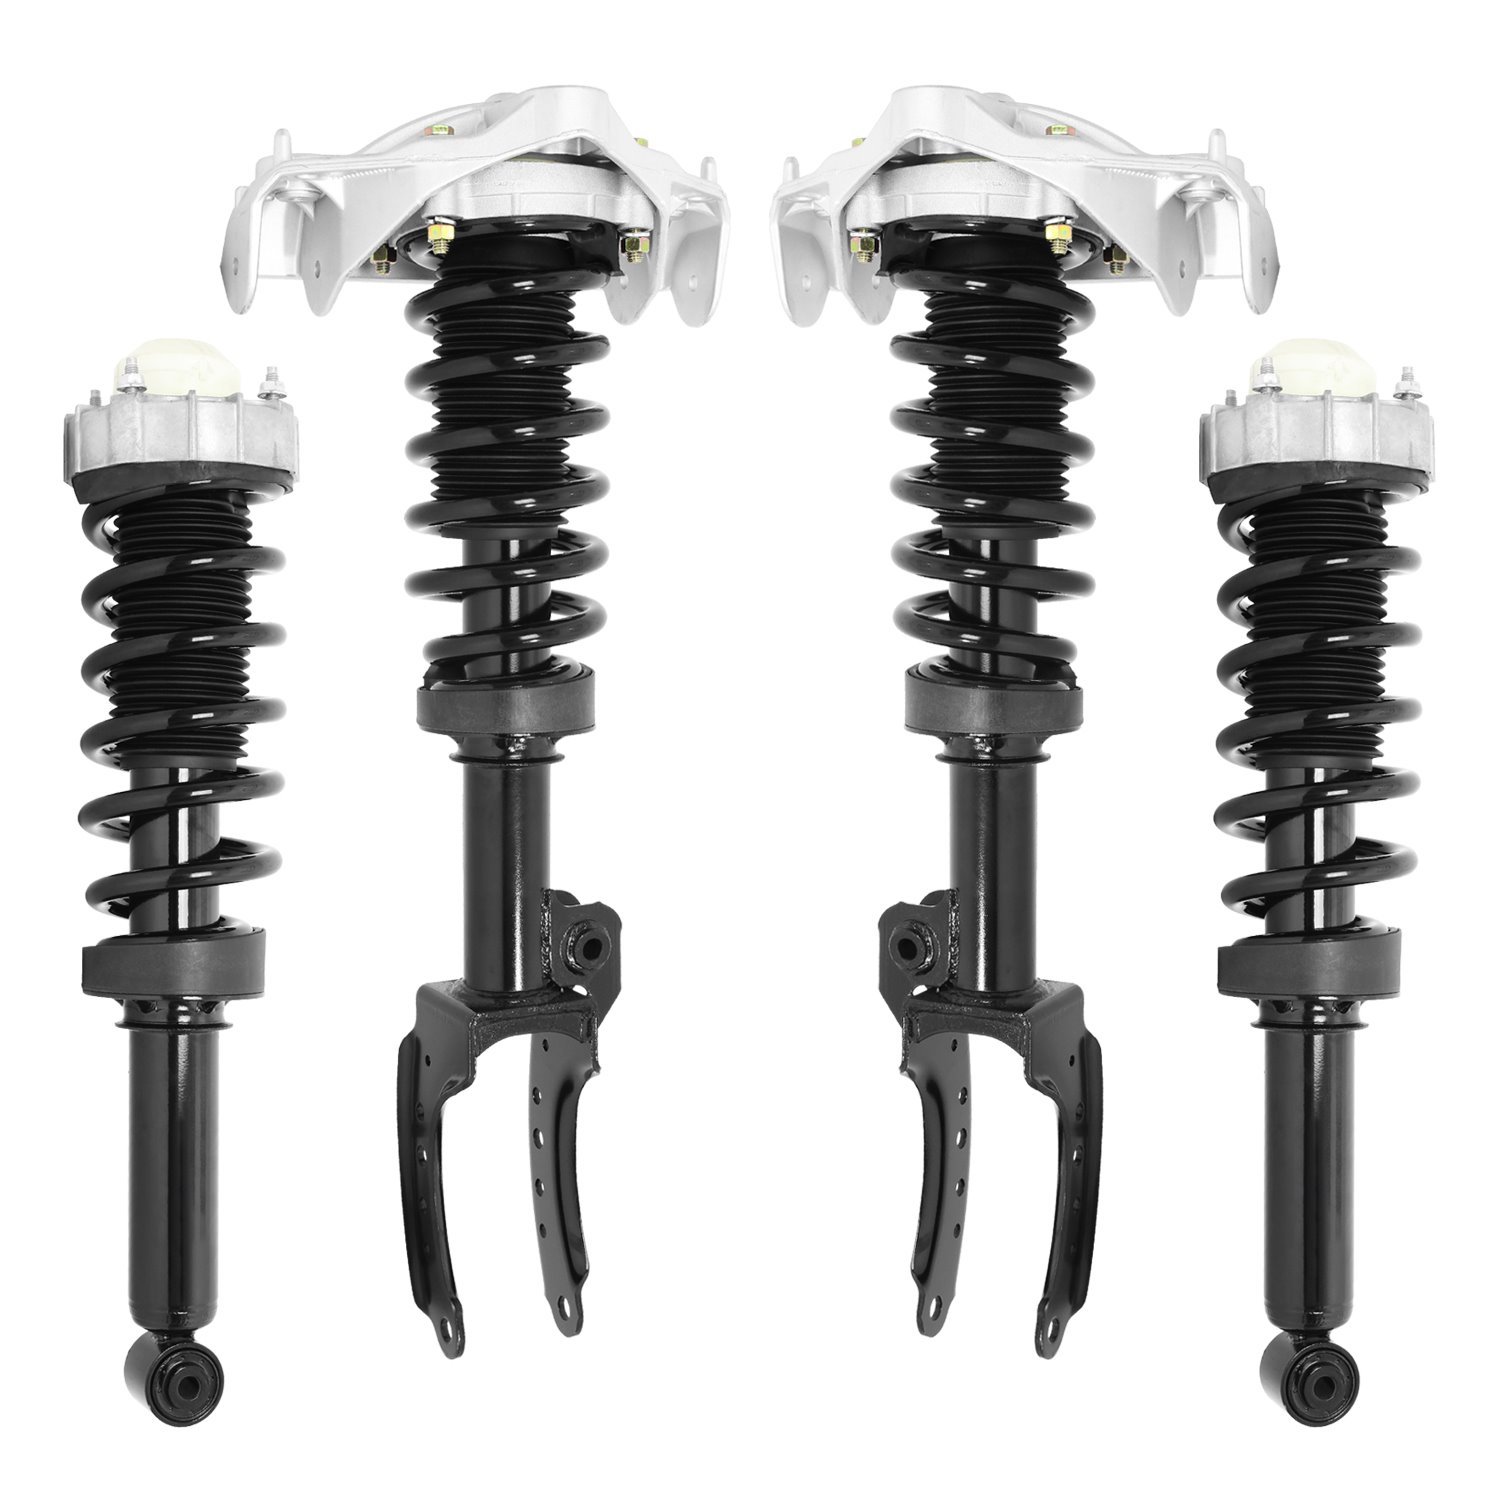 4-31-132500-A-31-532500 Air Spring To Coil Spring Conversion Kit Fits Select Porsche Cayenne, Audi Q7, Volkswagen Touareg